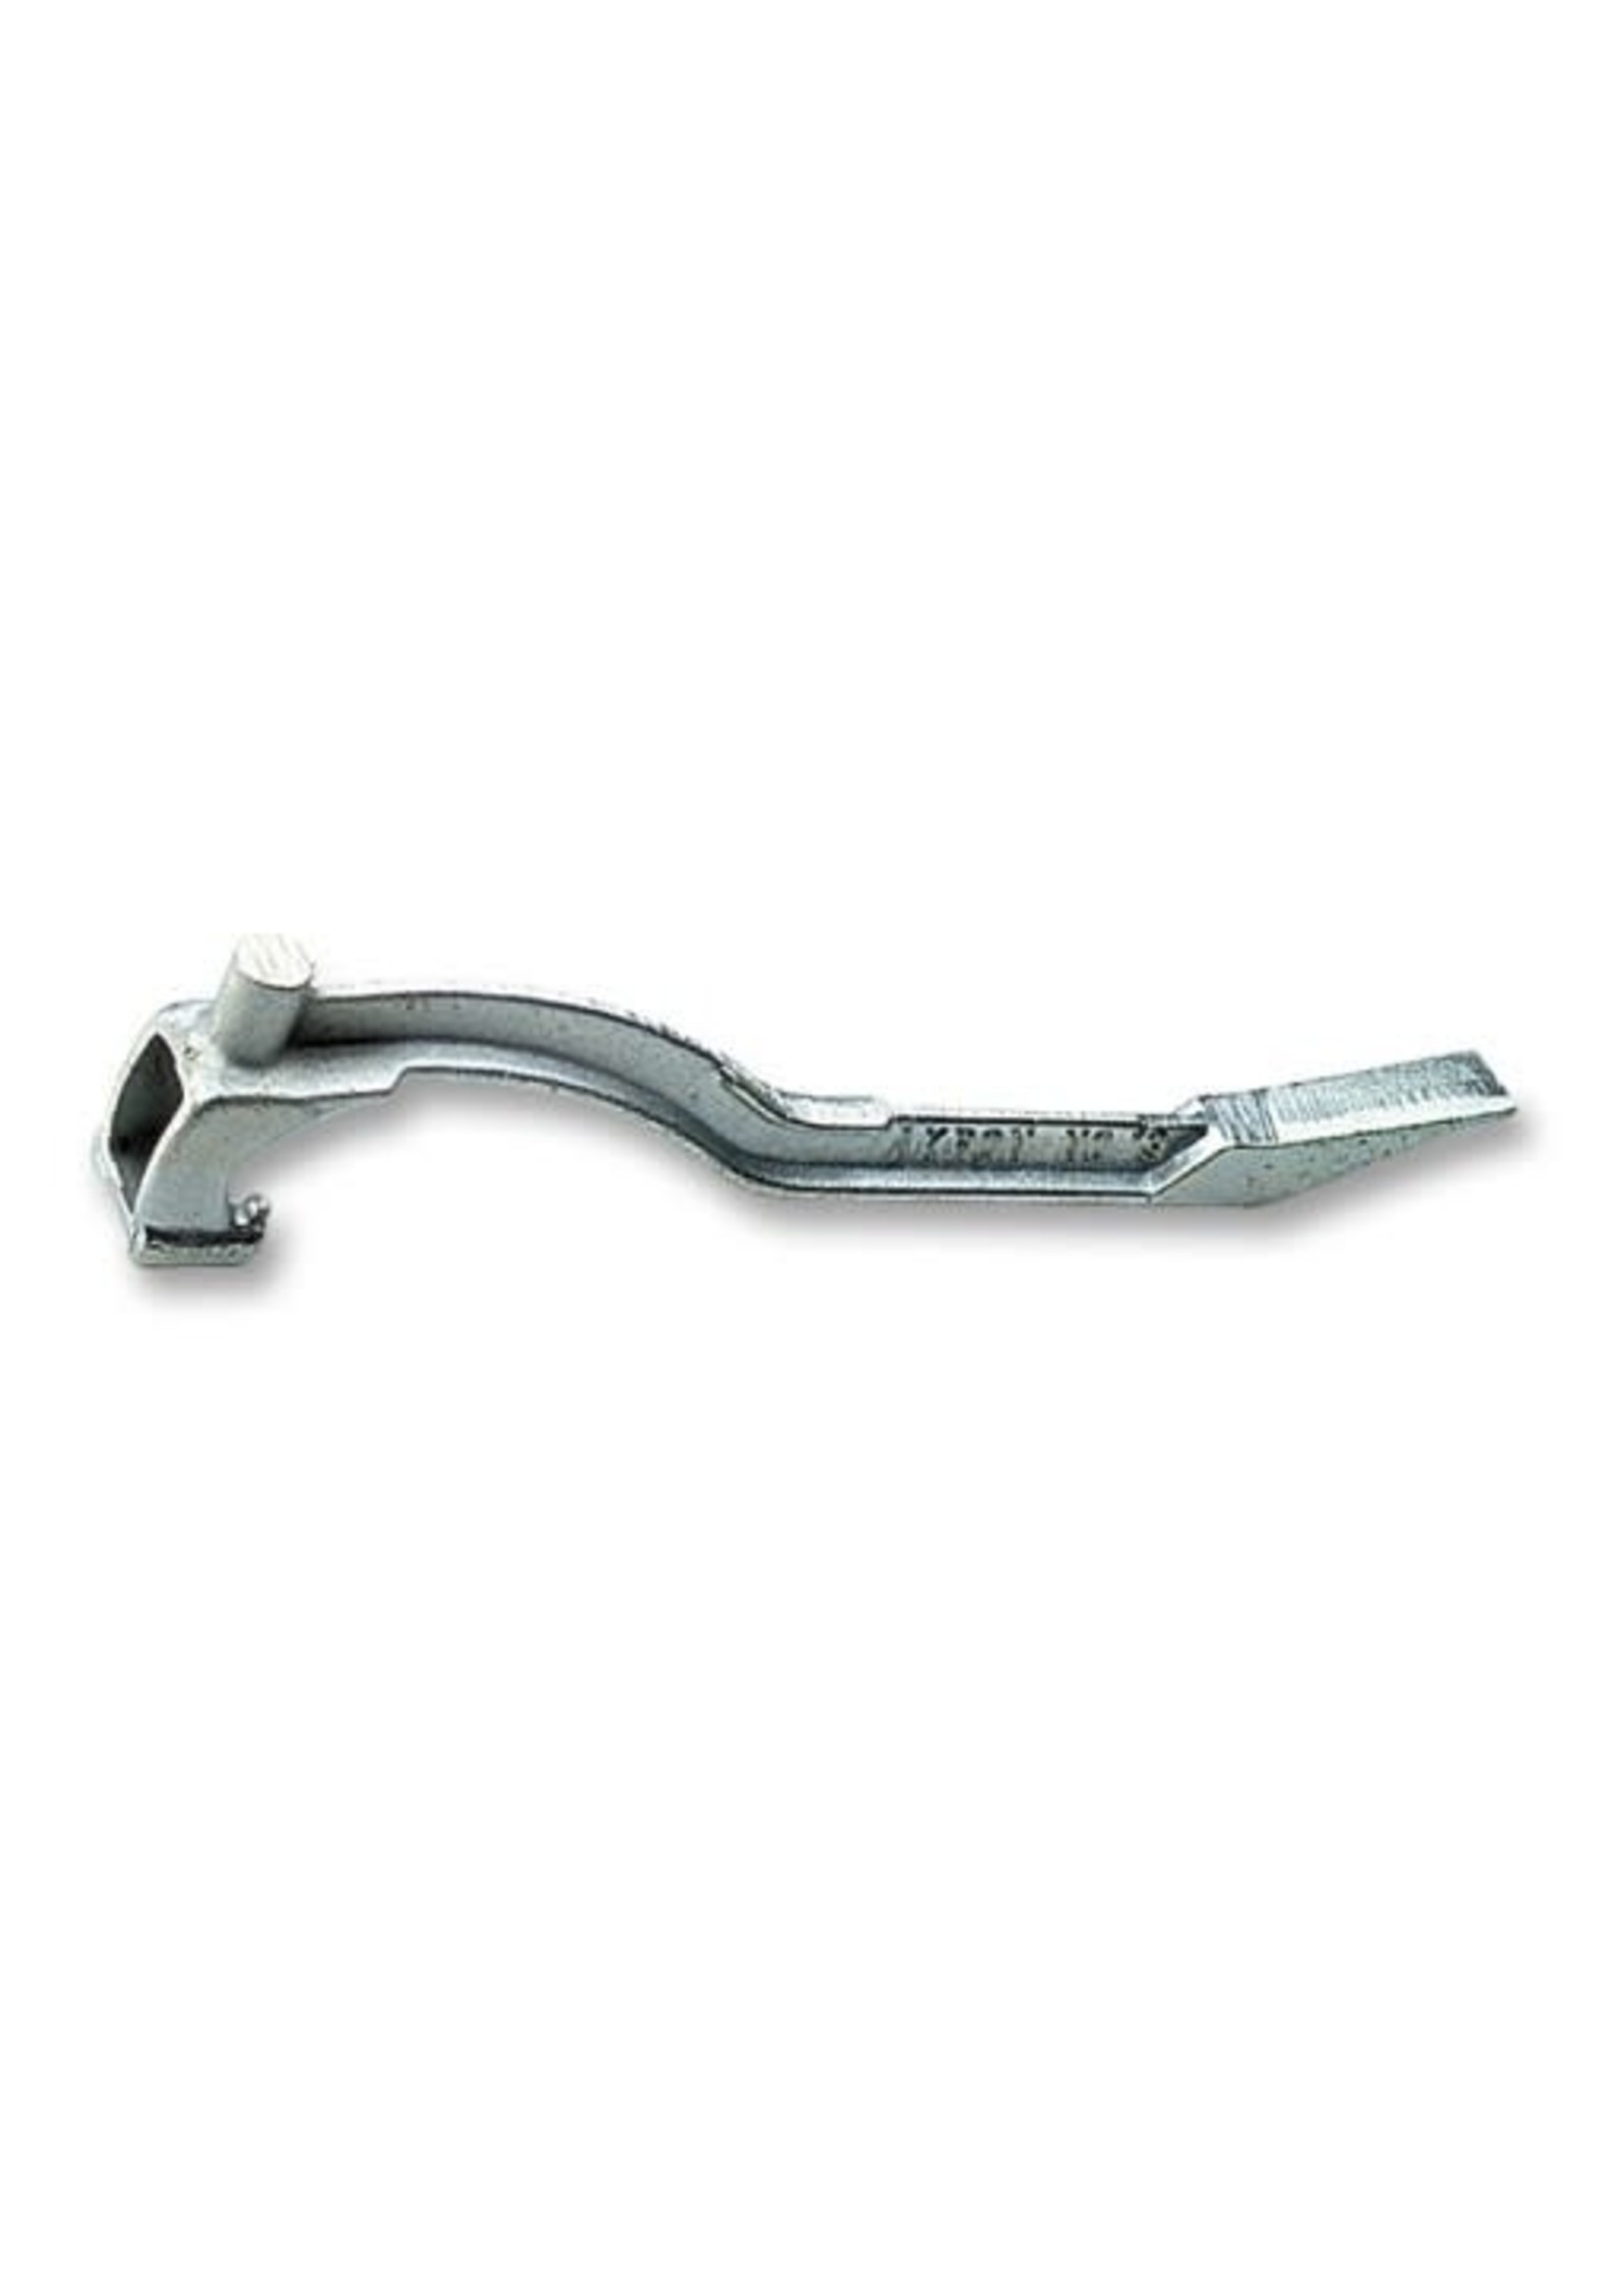 LDH Spanner Wrench